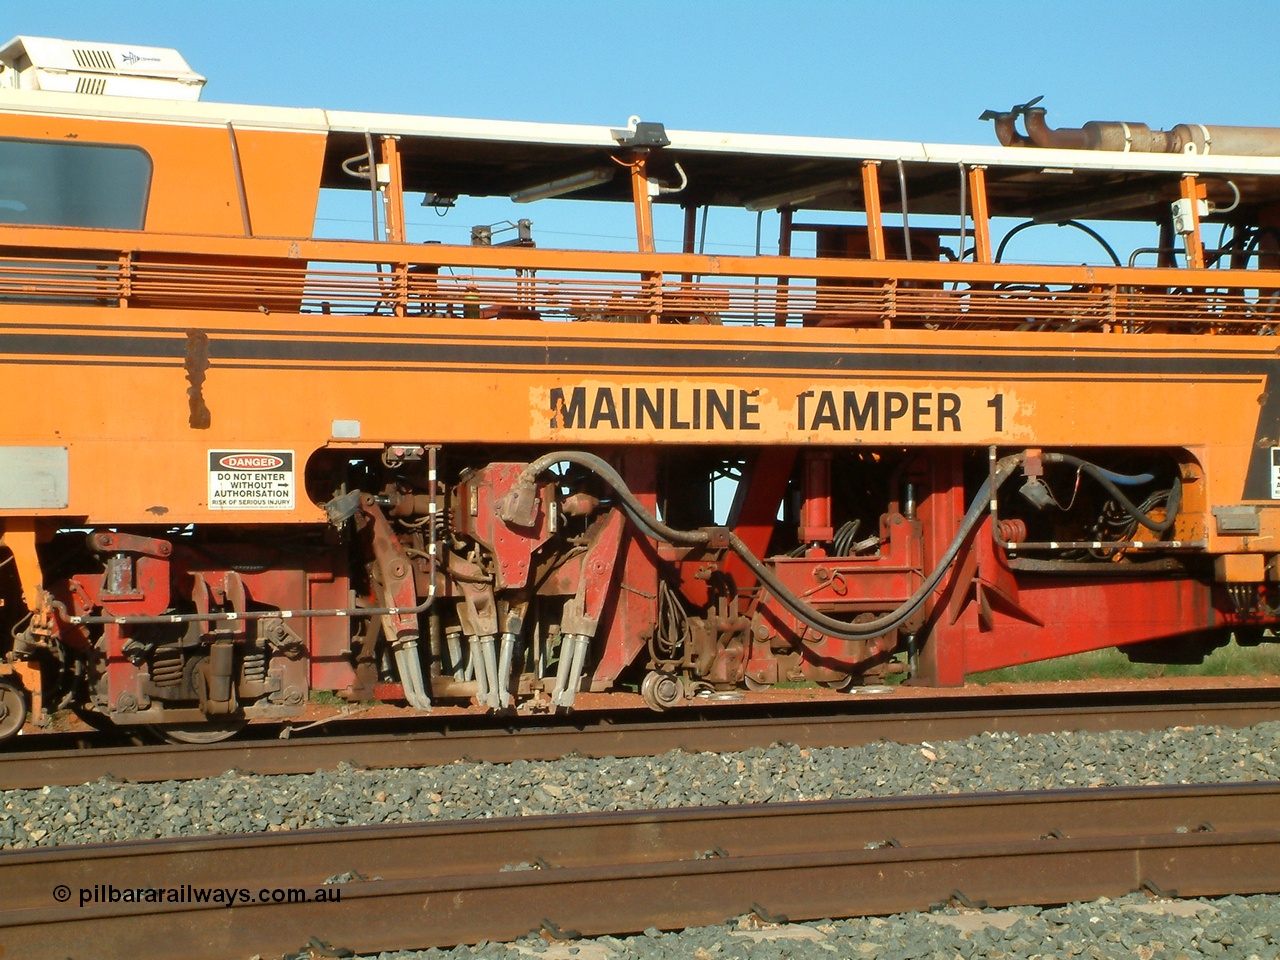 040408 162720
Mooka Siding north backtrack, view of the tamping mechanism of BHP's mainline Tamper 1, Plasser Australia 09-32 CAT model with serial 306. 8th April 2004.
Keywords: Tamper1;Plasser-Australia;09-32-CAT;306;track-machine;